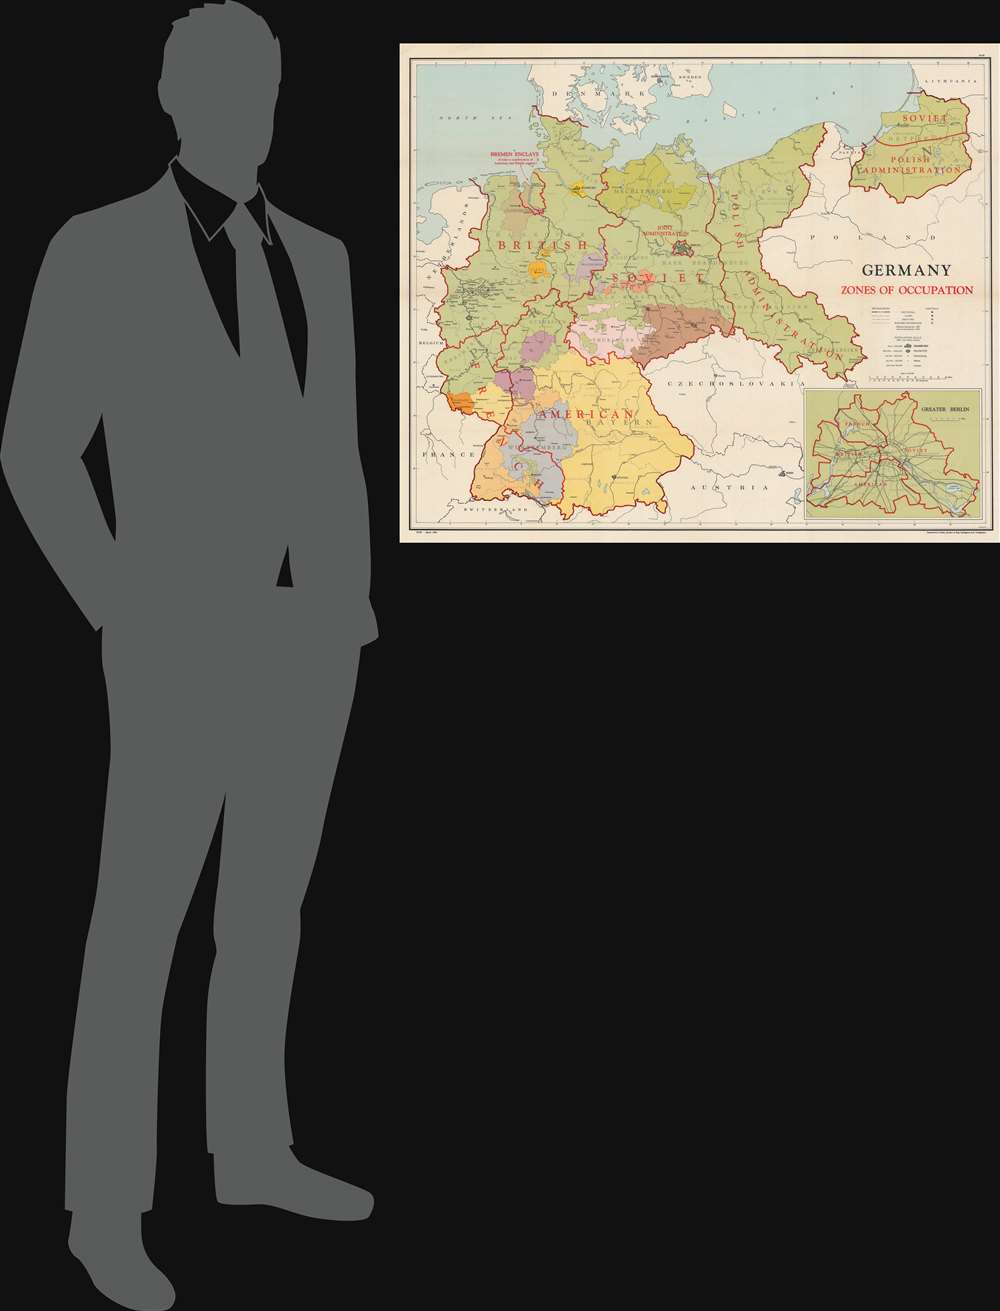 Germany Zones of Occupation. - Alternate View 1